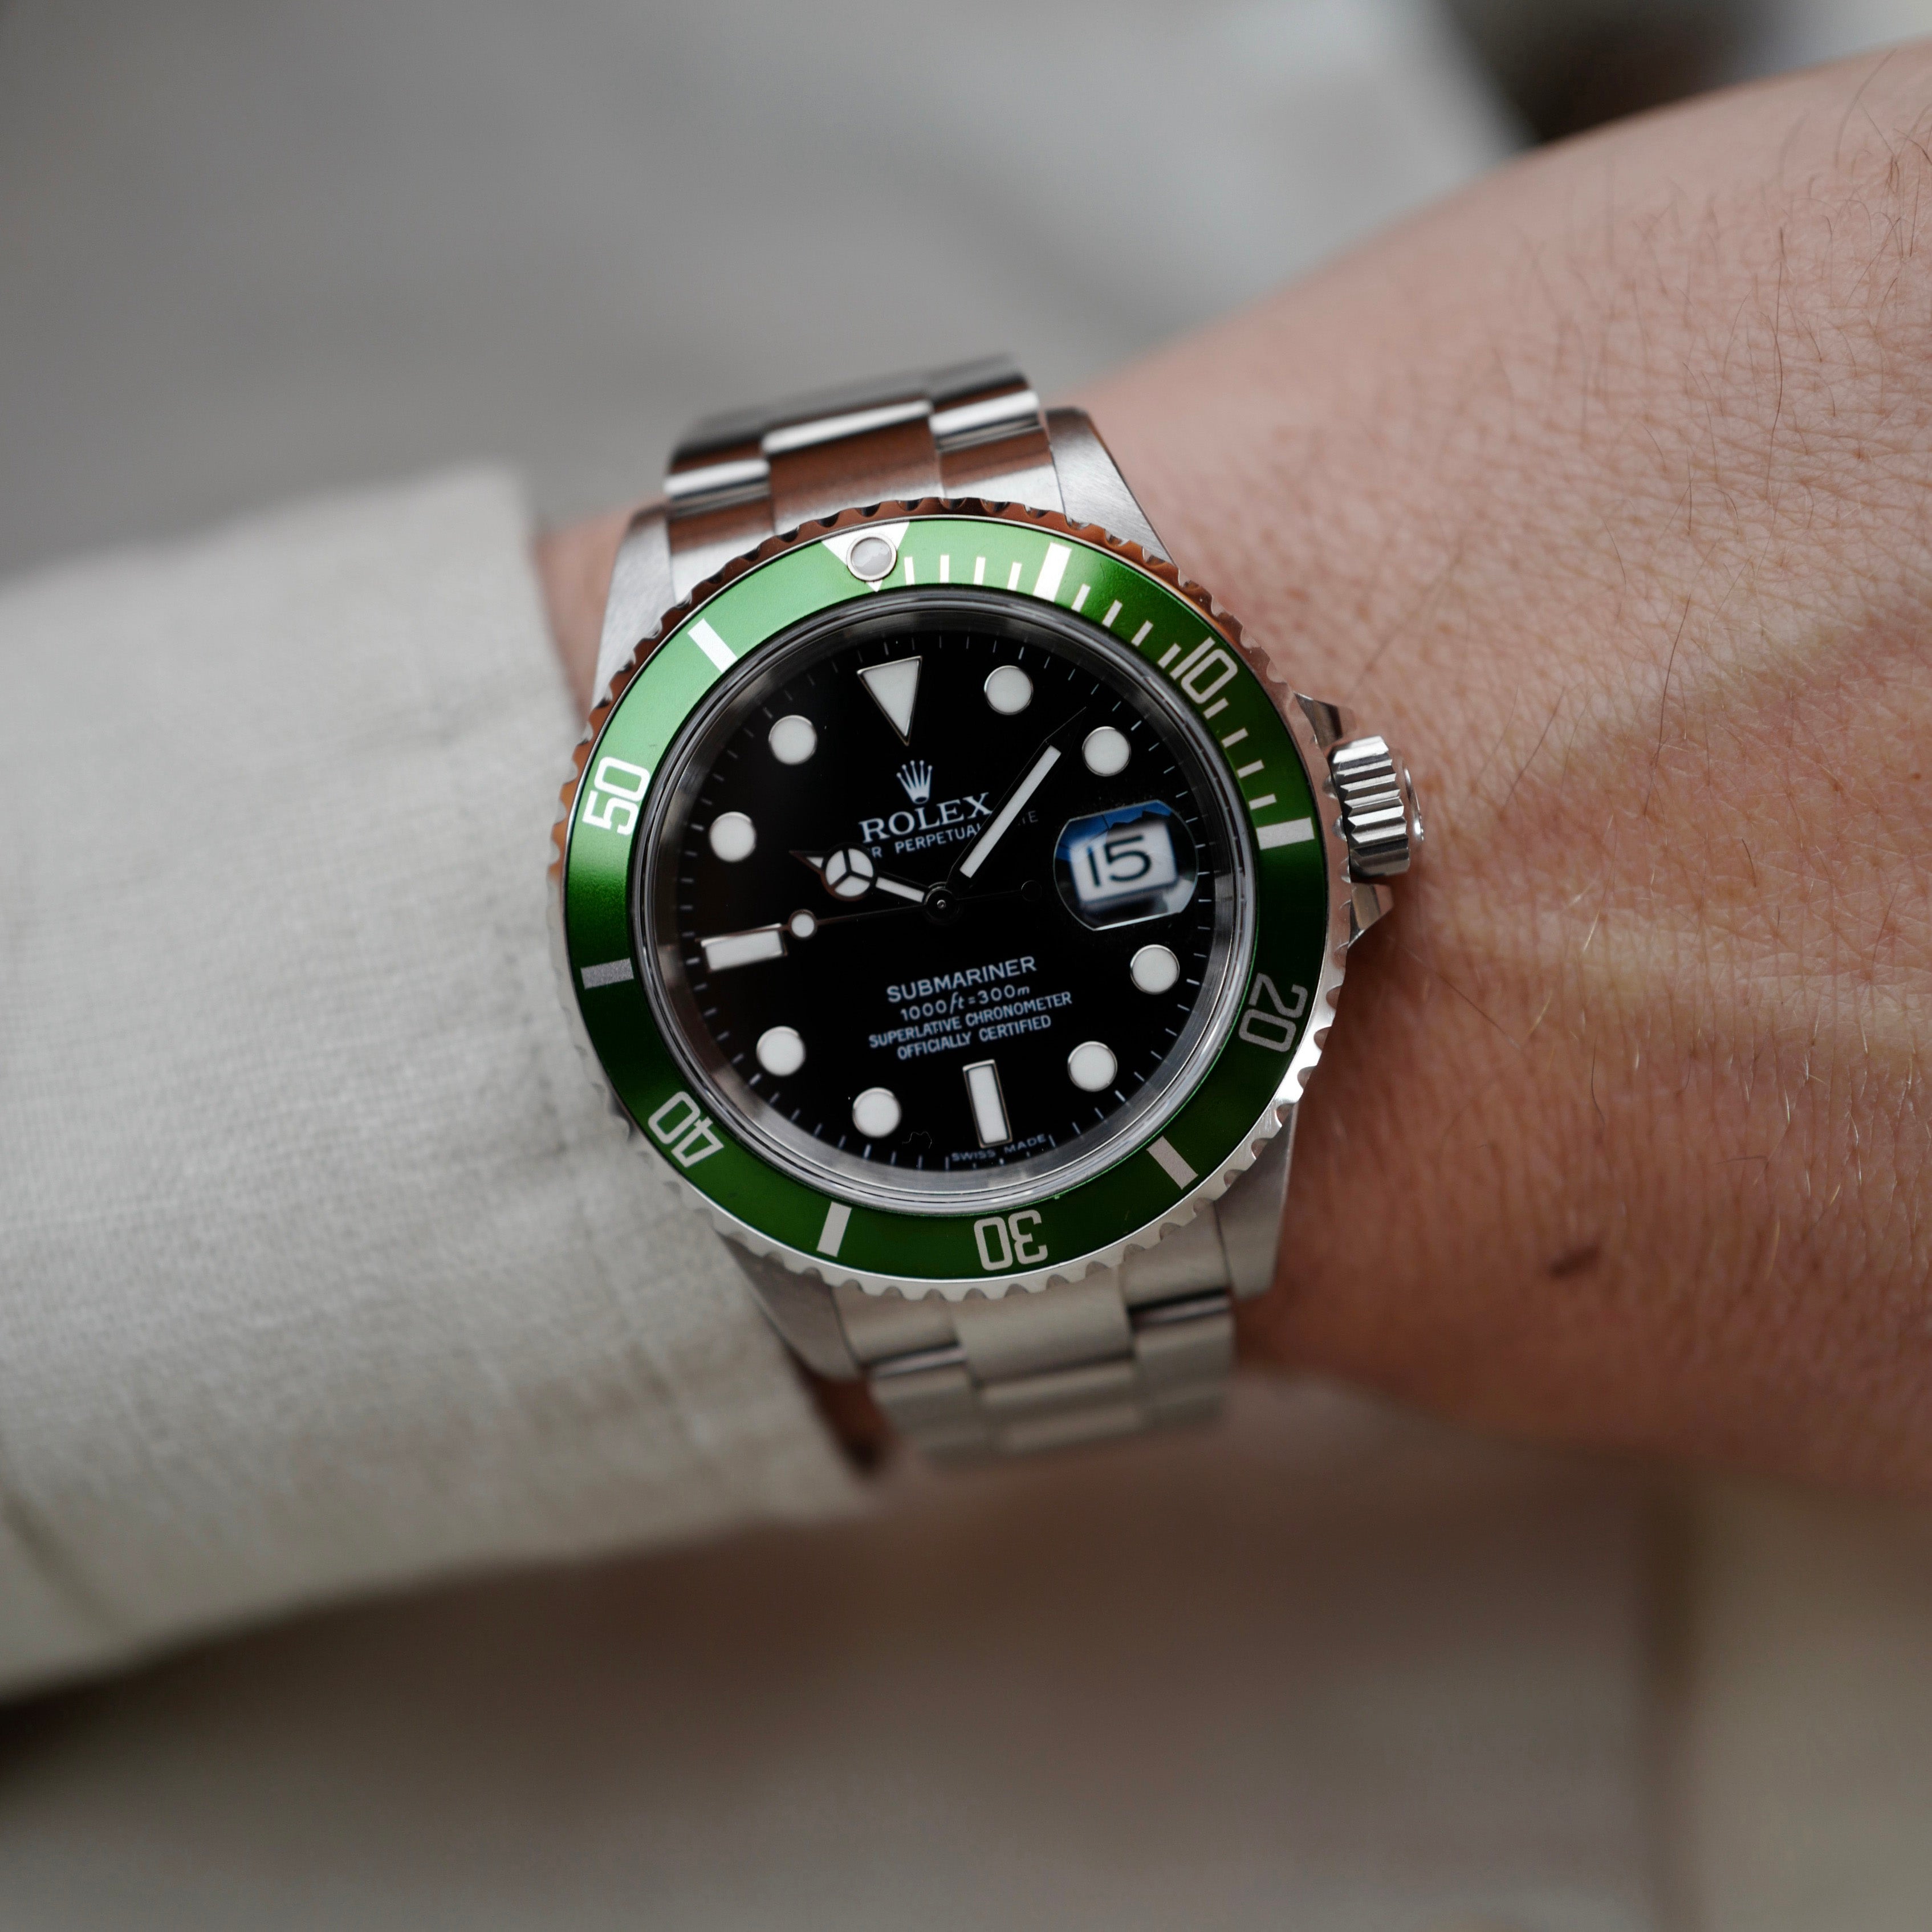 Rolex Submariner 16610LV The Watches